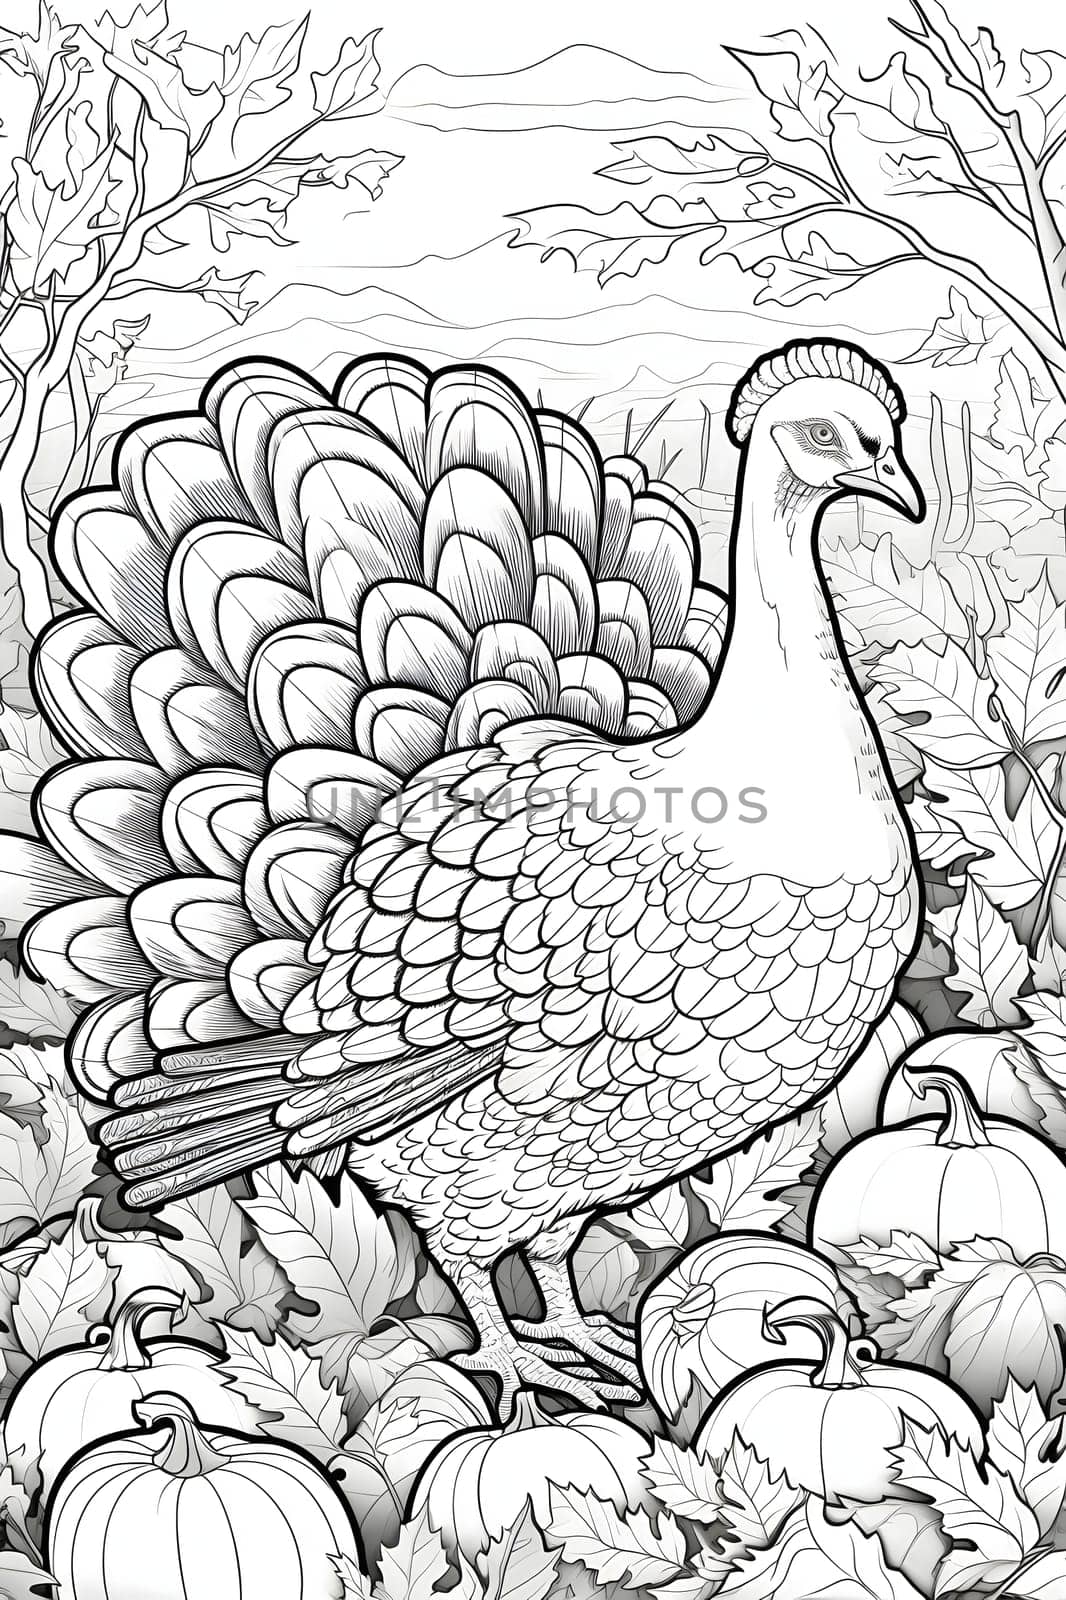 Black and White coloring book turkey on southern tree leaves autumn. Turkey as the main dish of thanksgiving for the harvest, picture on a white isolated background. by ThemesS